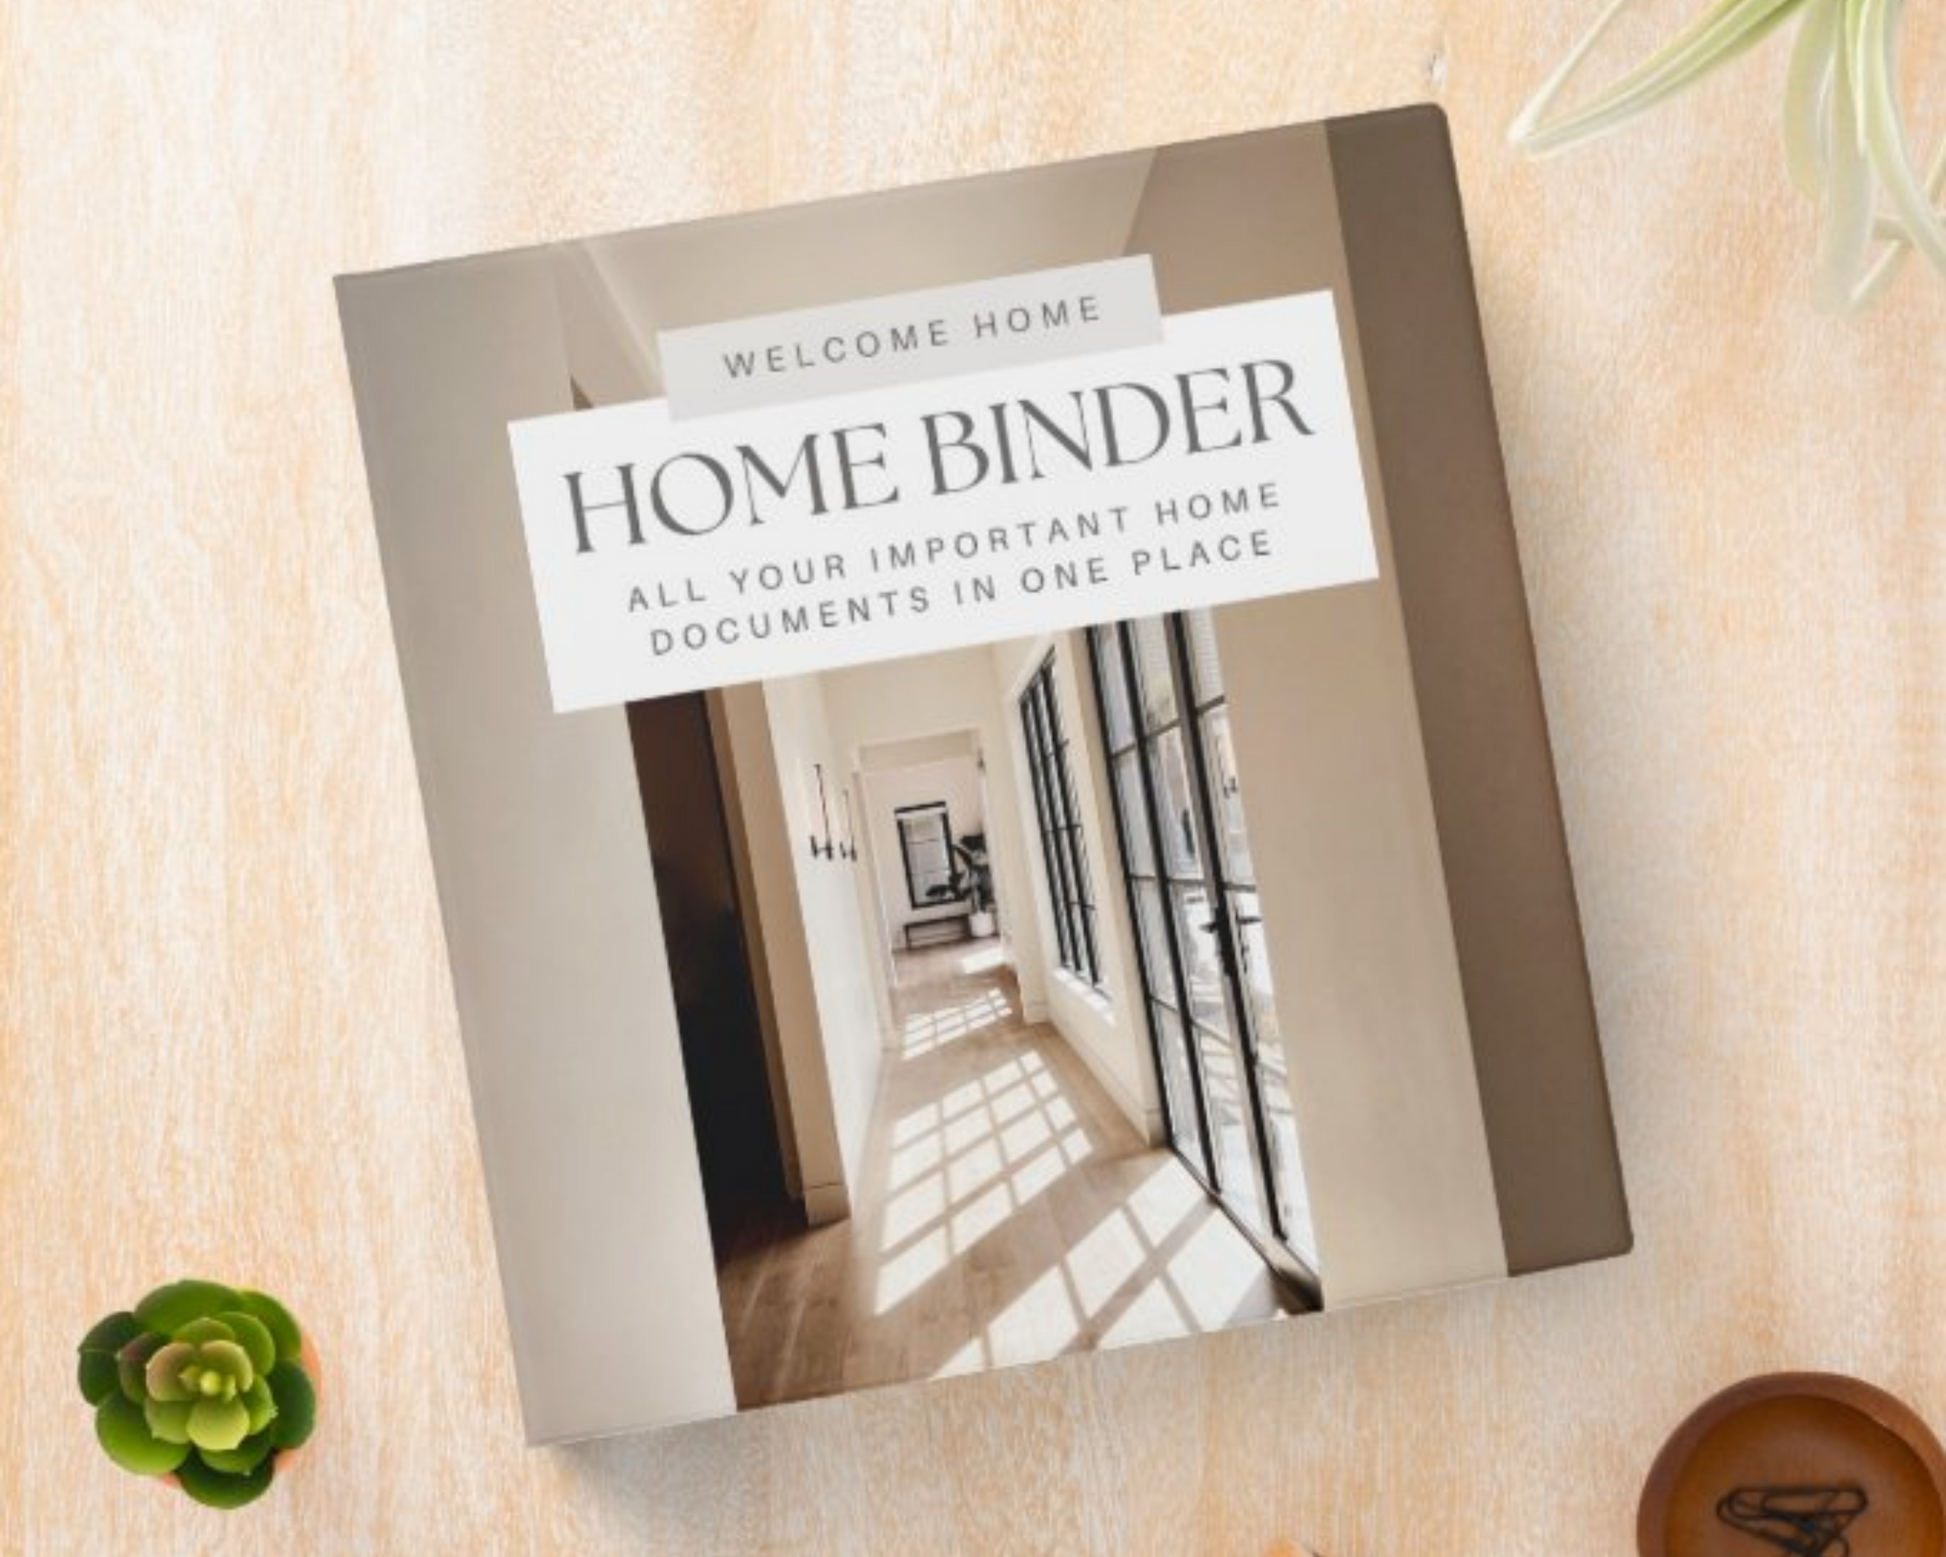 Real Estate Client Closing Gift, New Home Binder, Home Buyer Packet, Real Estate Marketing, Client Exit Packet, Real Estate Guide, Canva